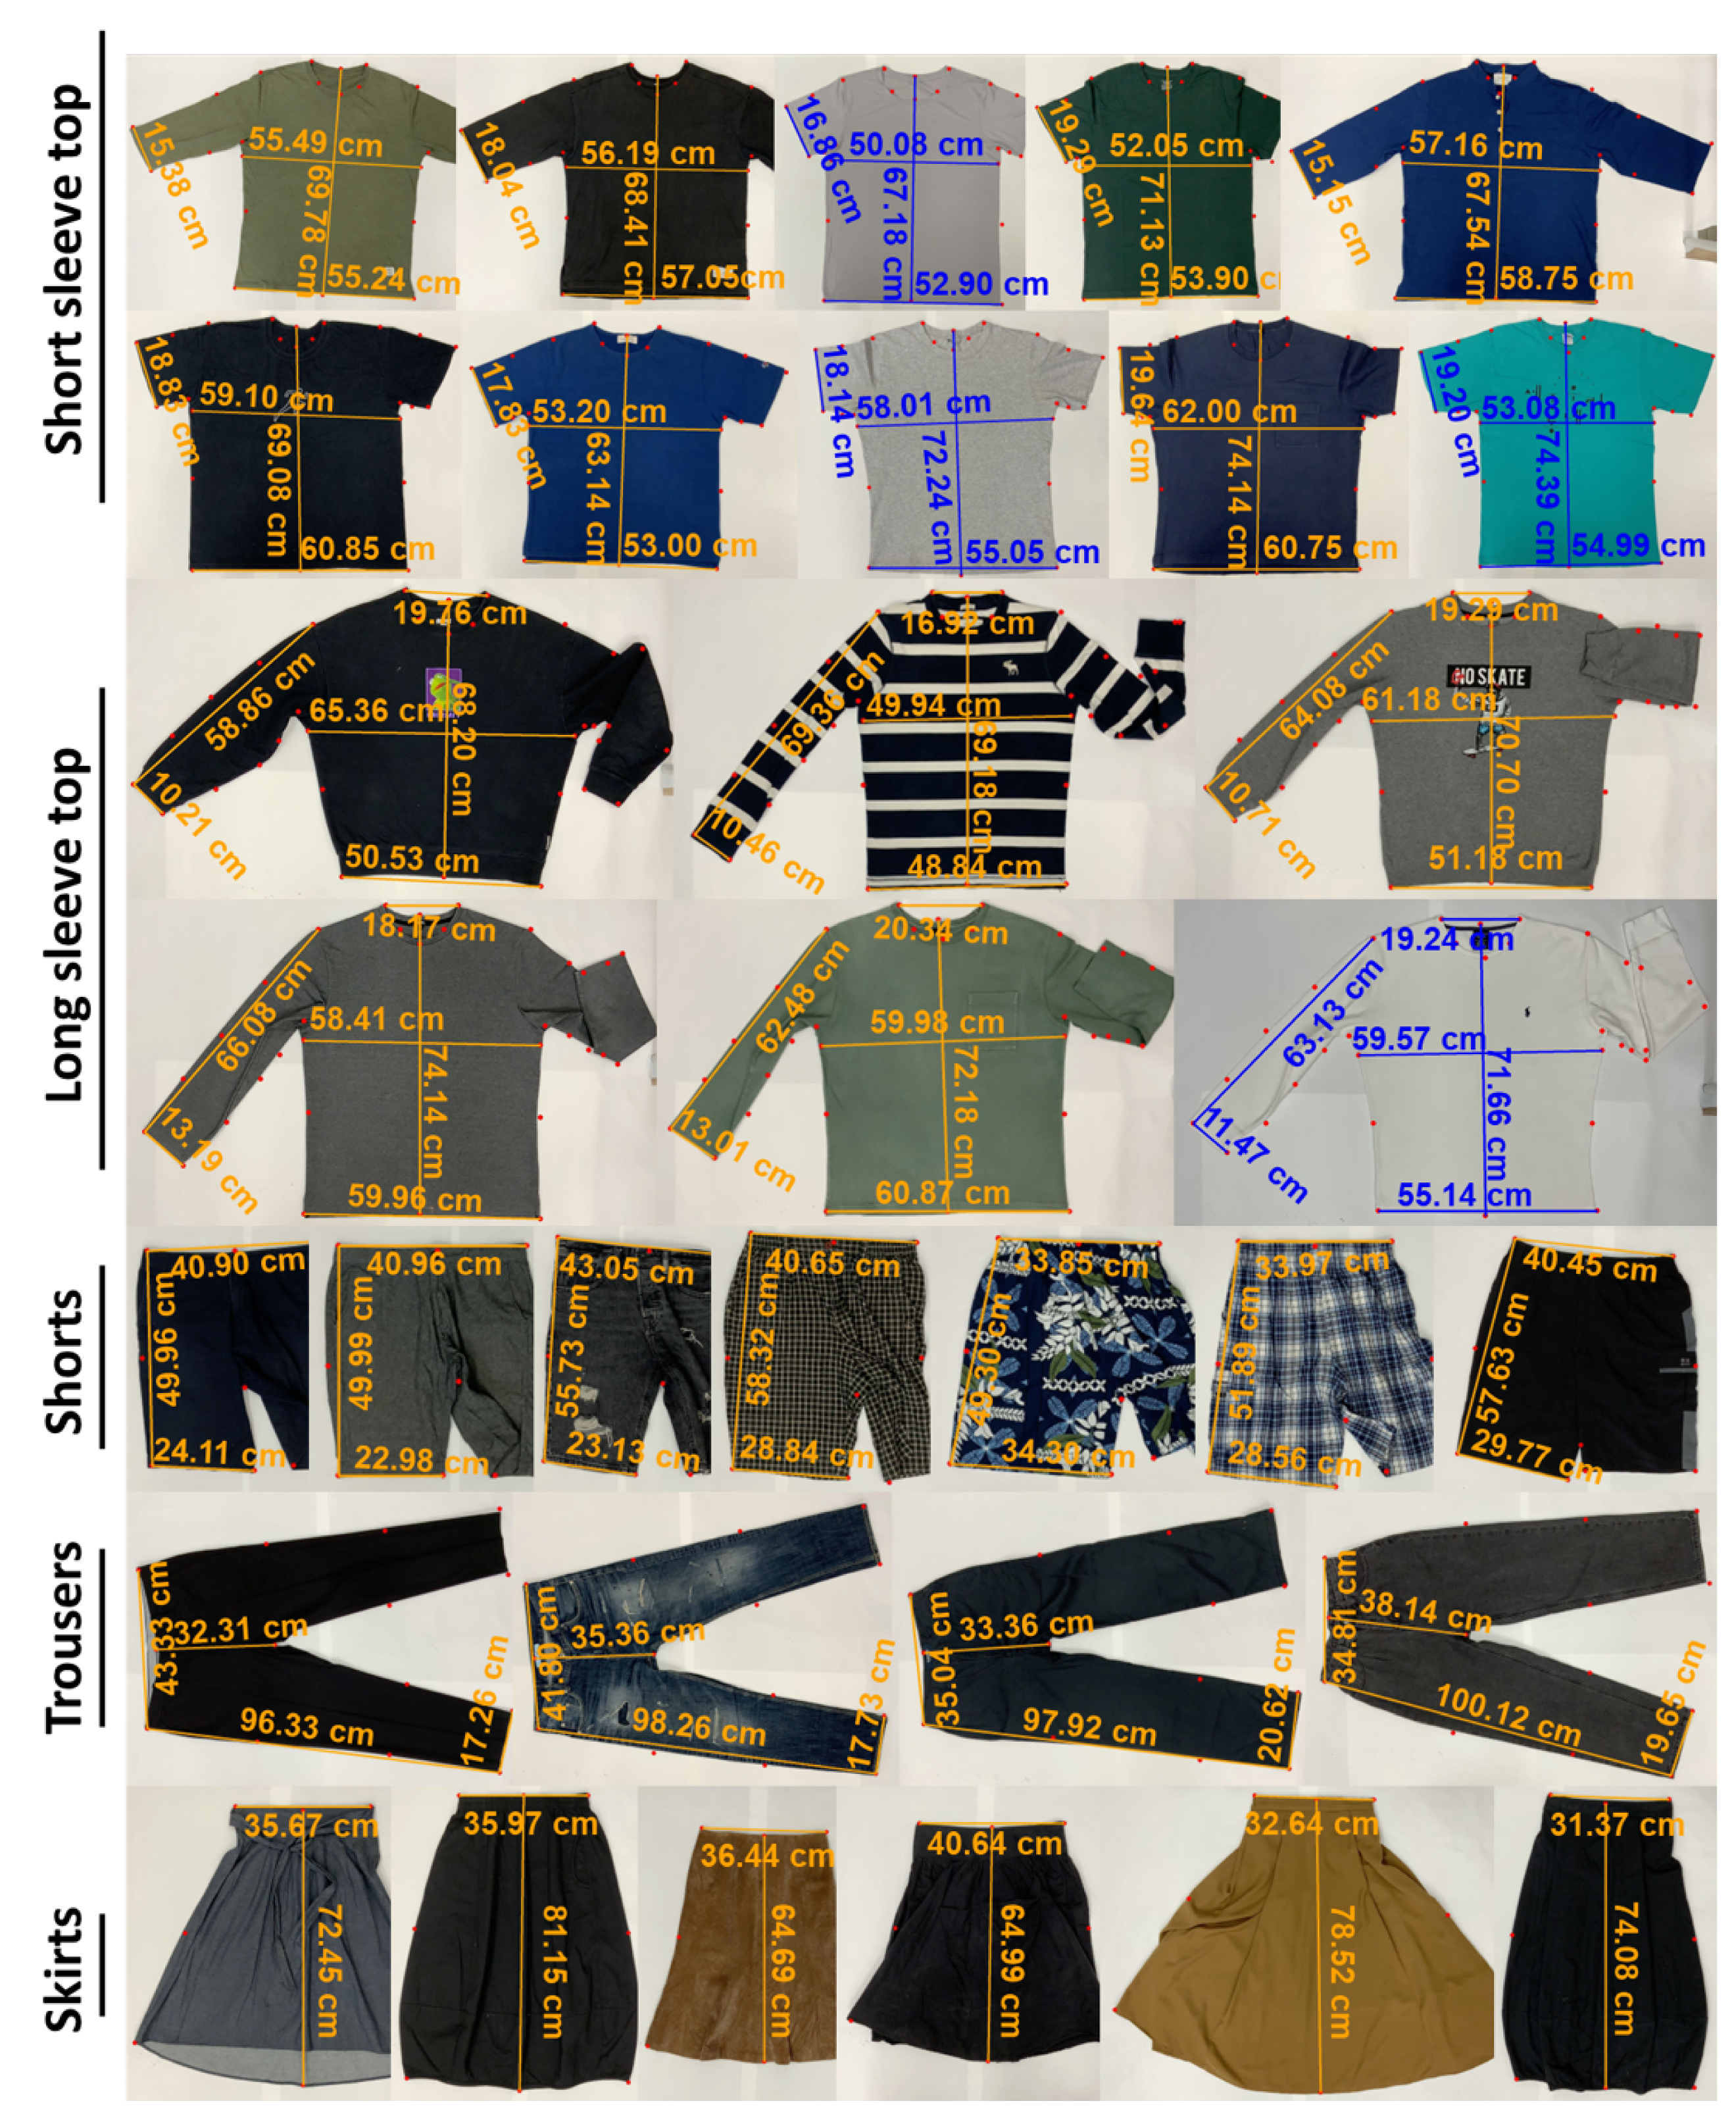 Automatic | | Sciences Models Garment Computer Free Full-Text of Data Cloud and Applied Learning Point Deep Sizes Vision Measurements Using